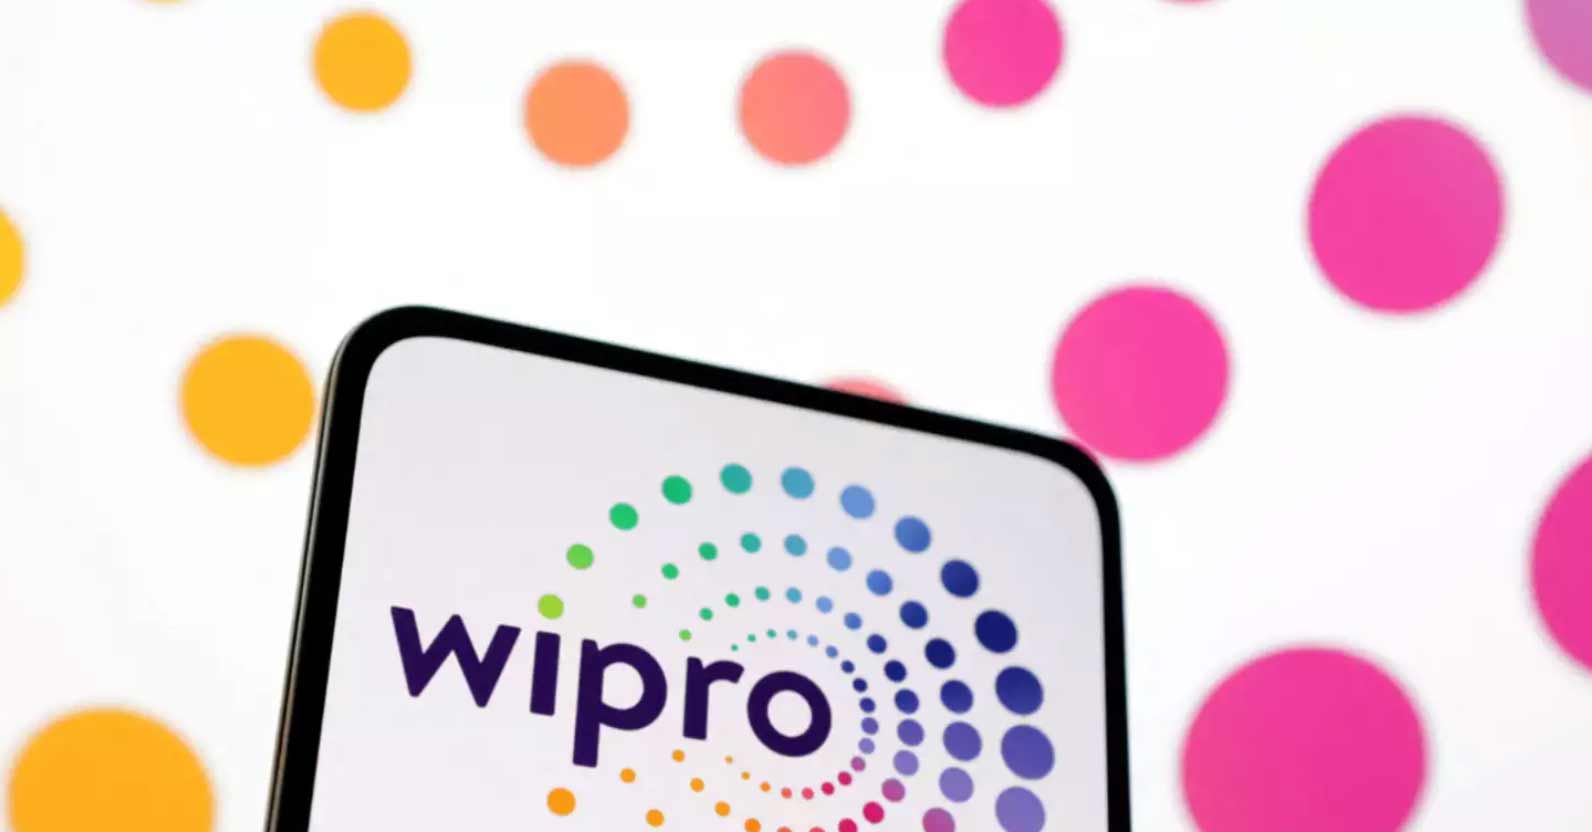 Wipro announces massive acquisition of 60% stake in Aggne Global in a 548 crore deal